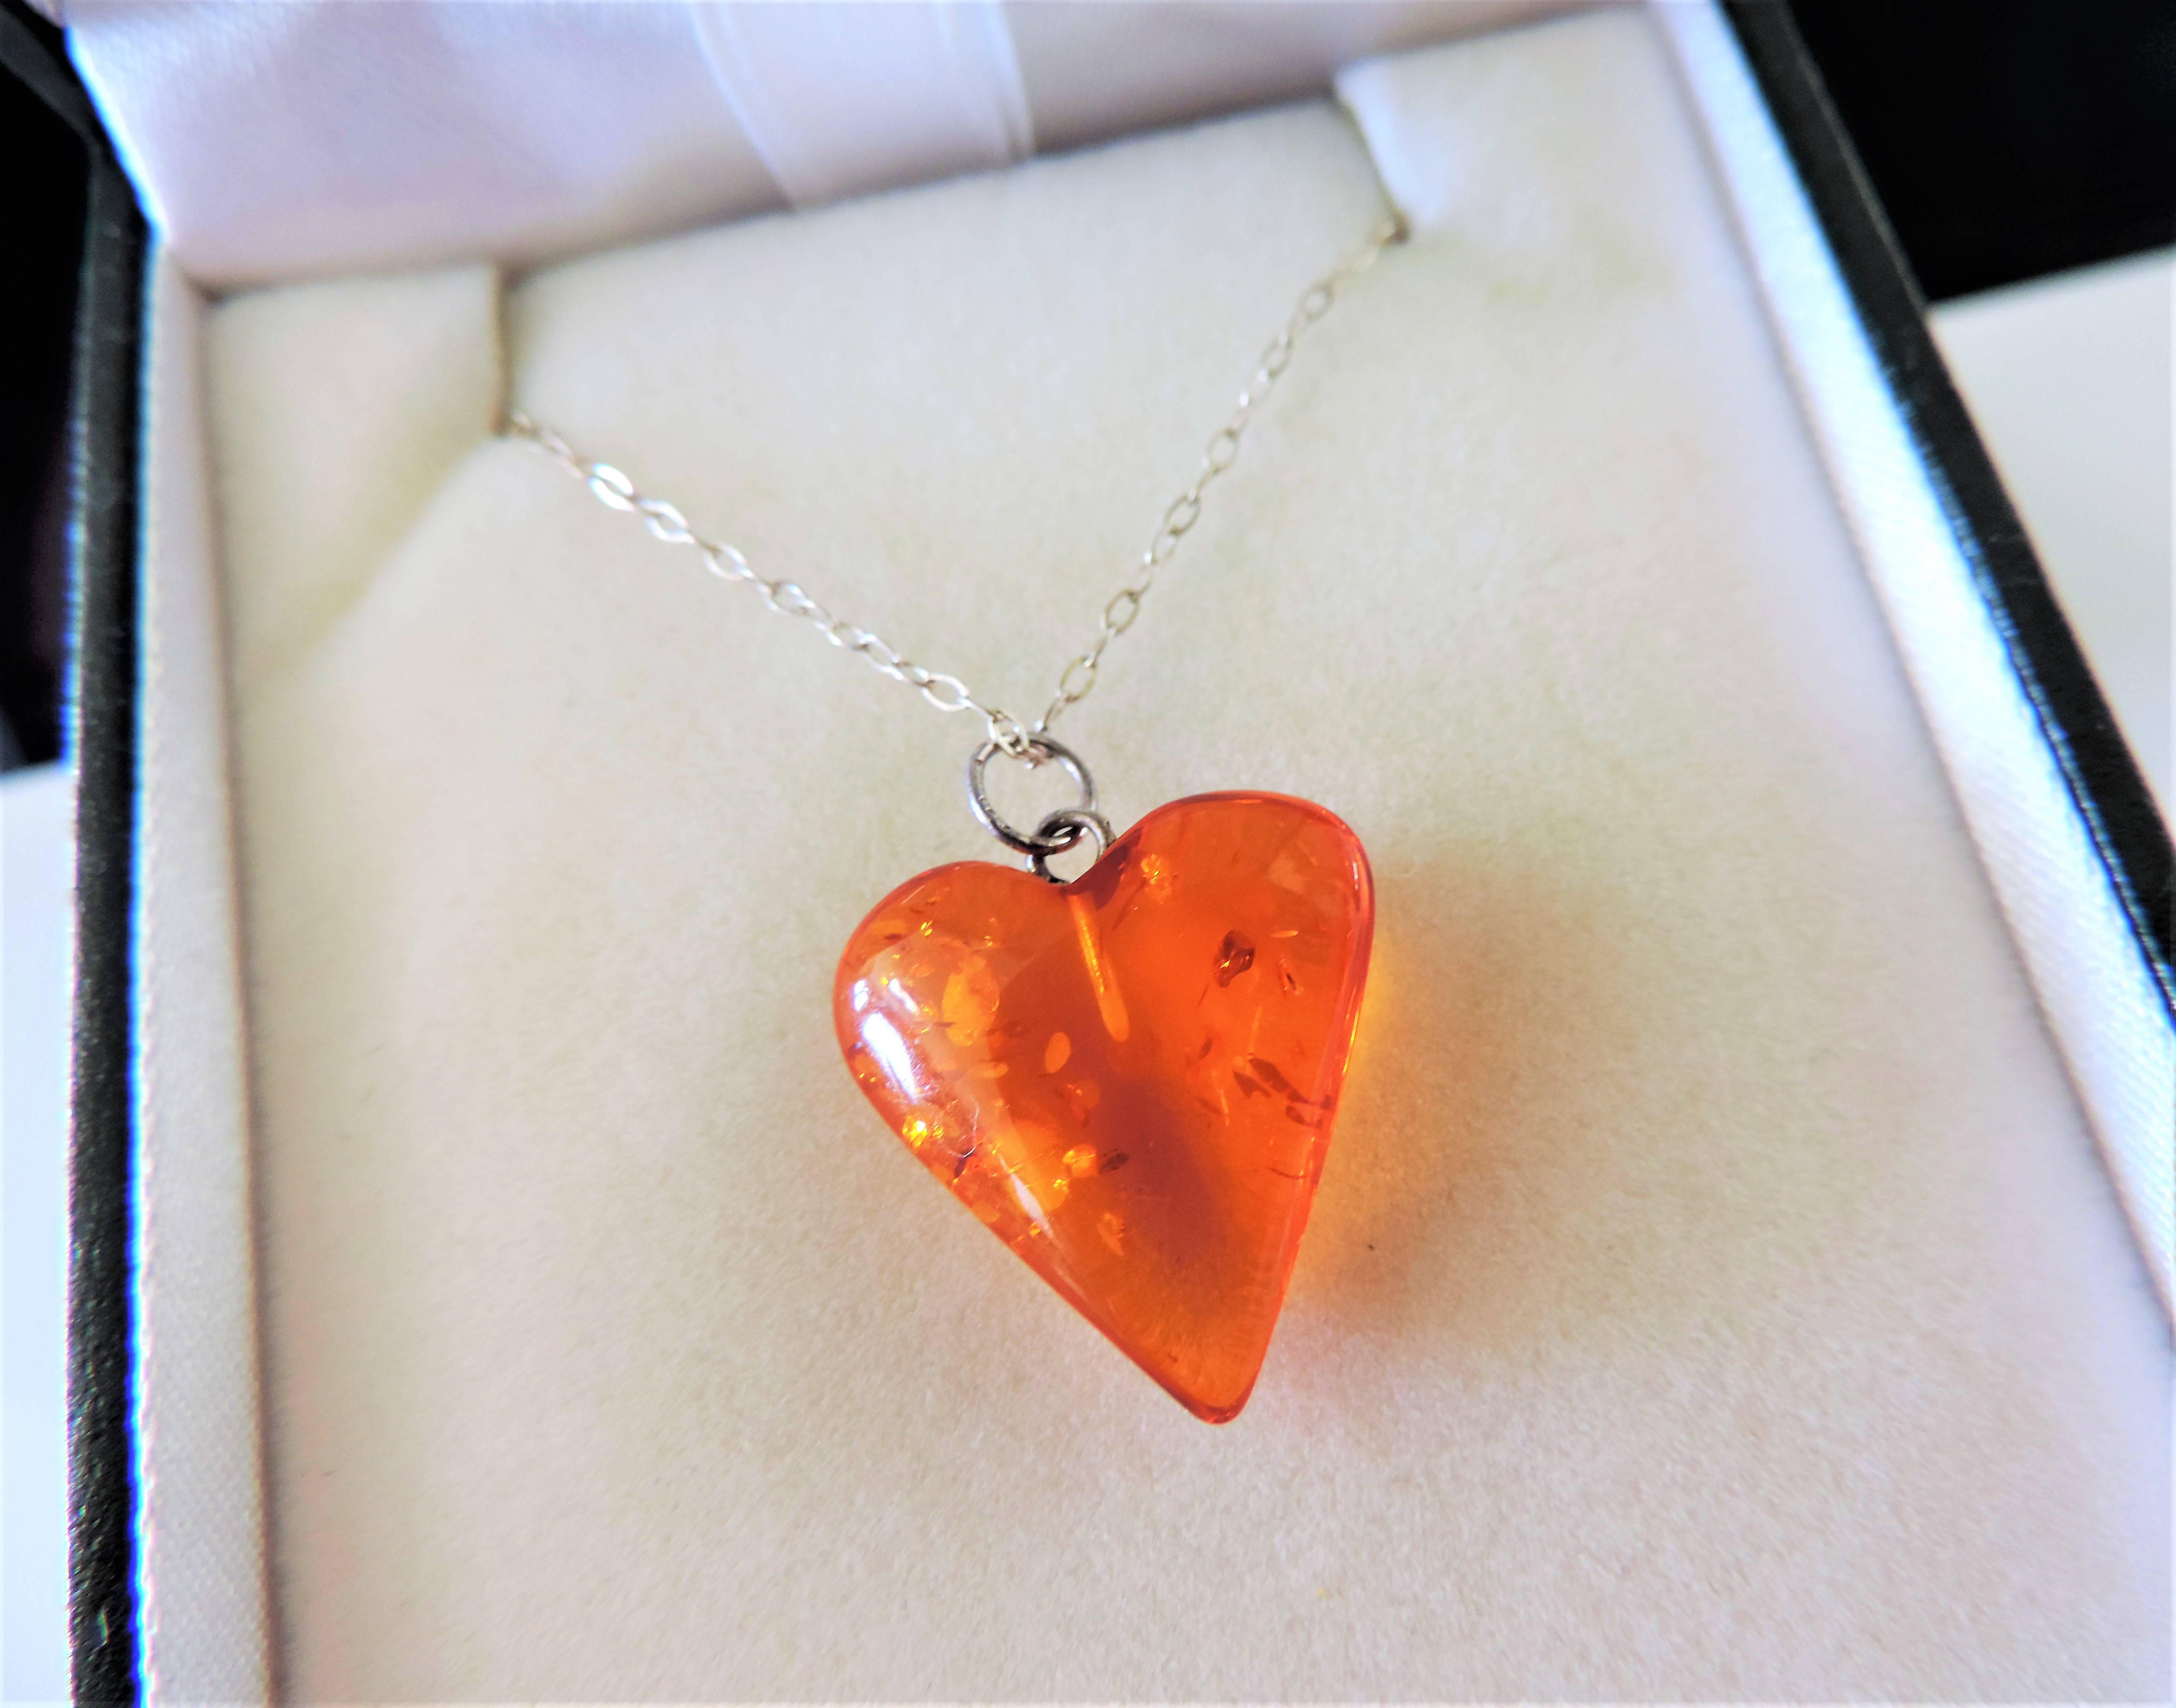 Baltic Amber Heart on Sterling Silver Chain - Image 2 of 2